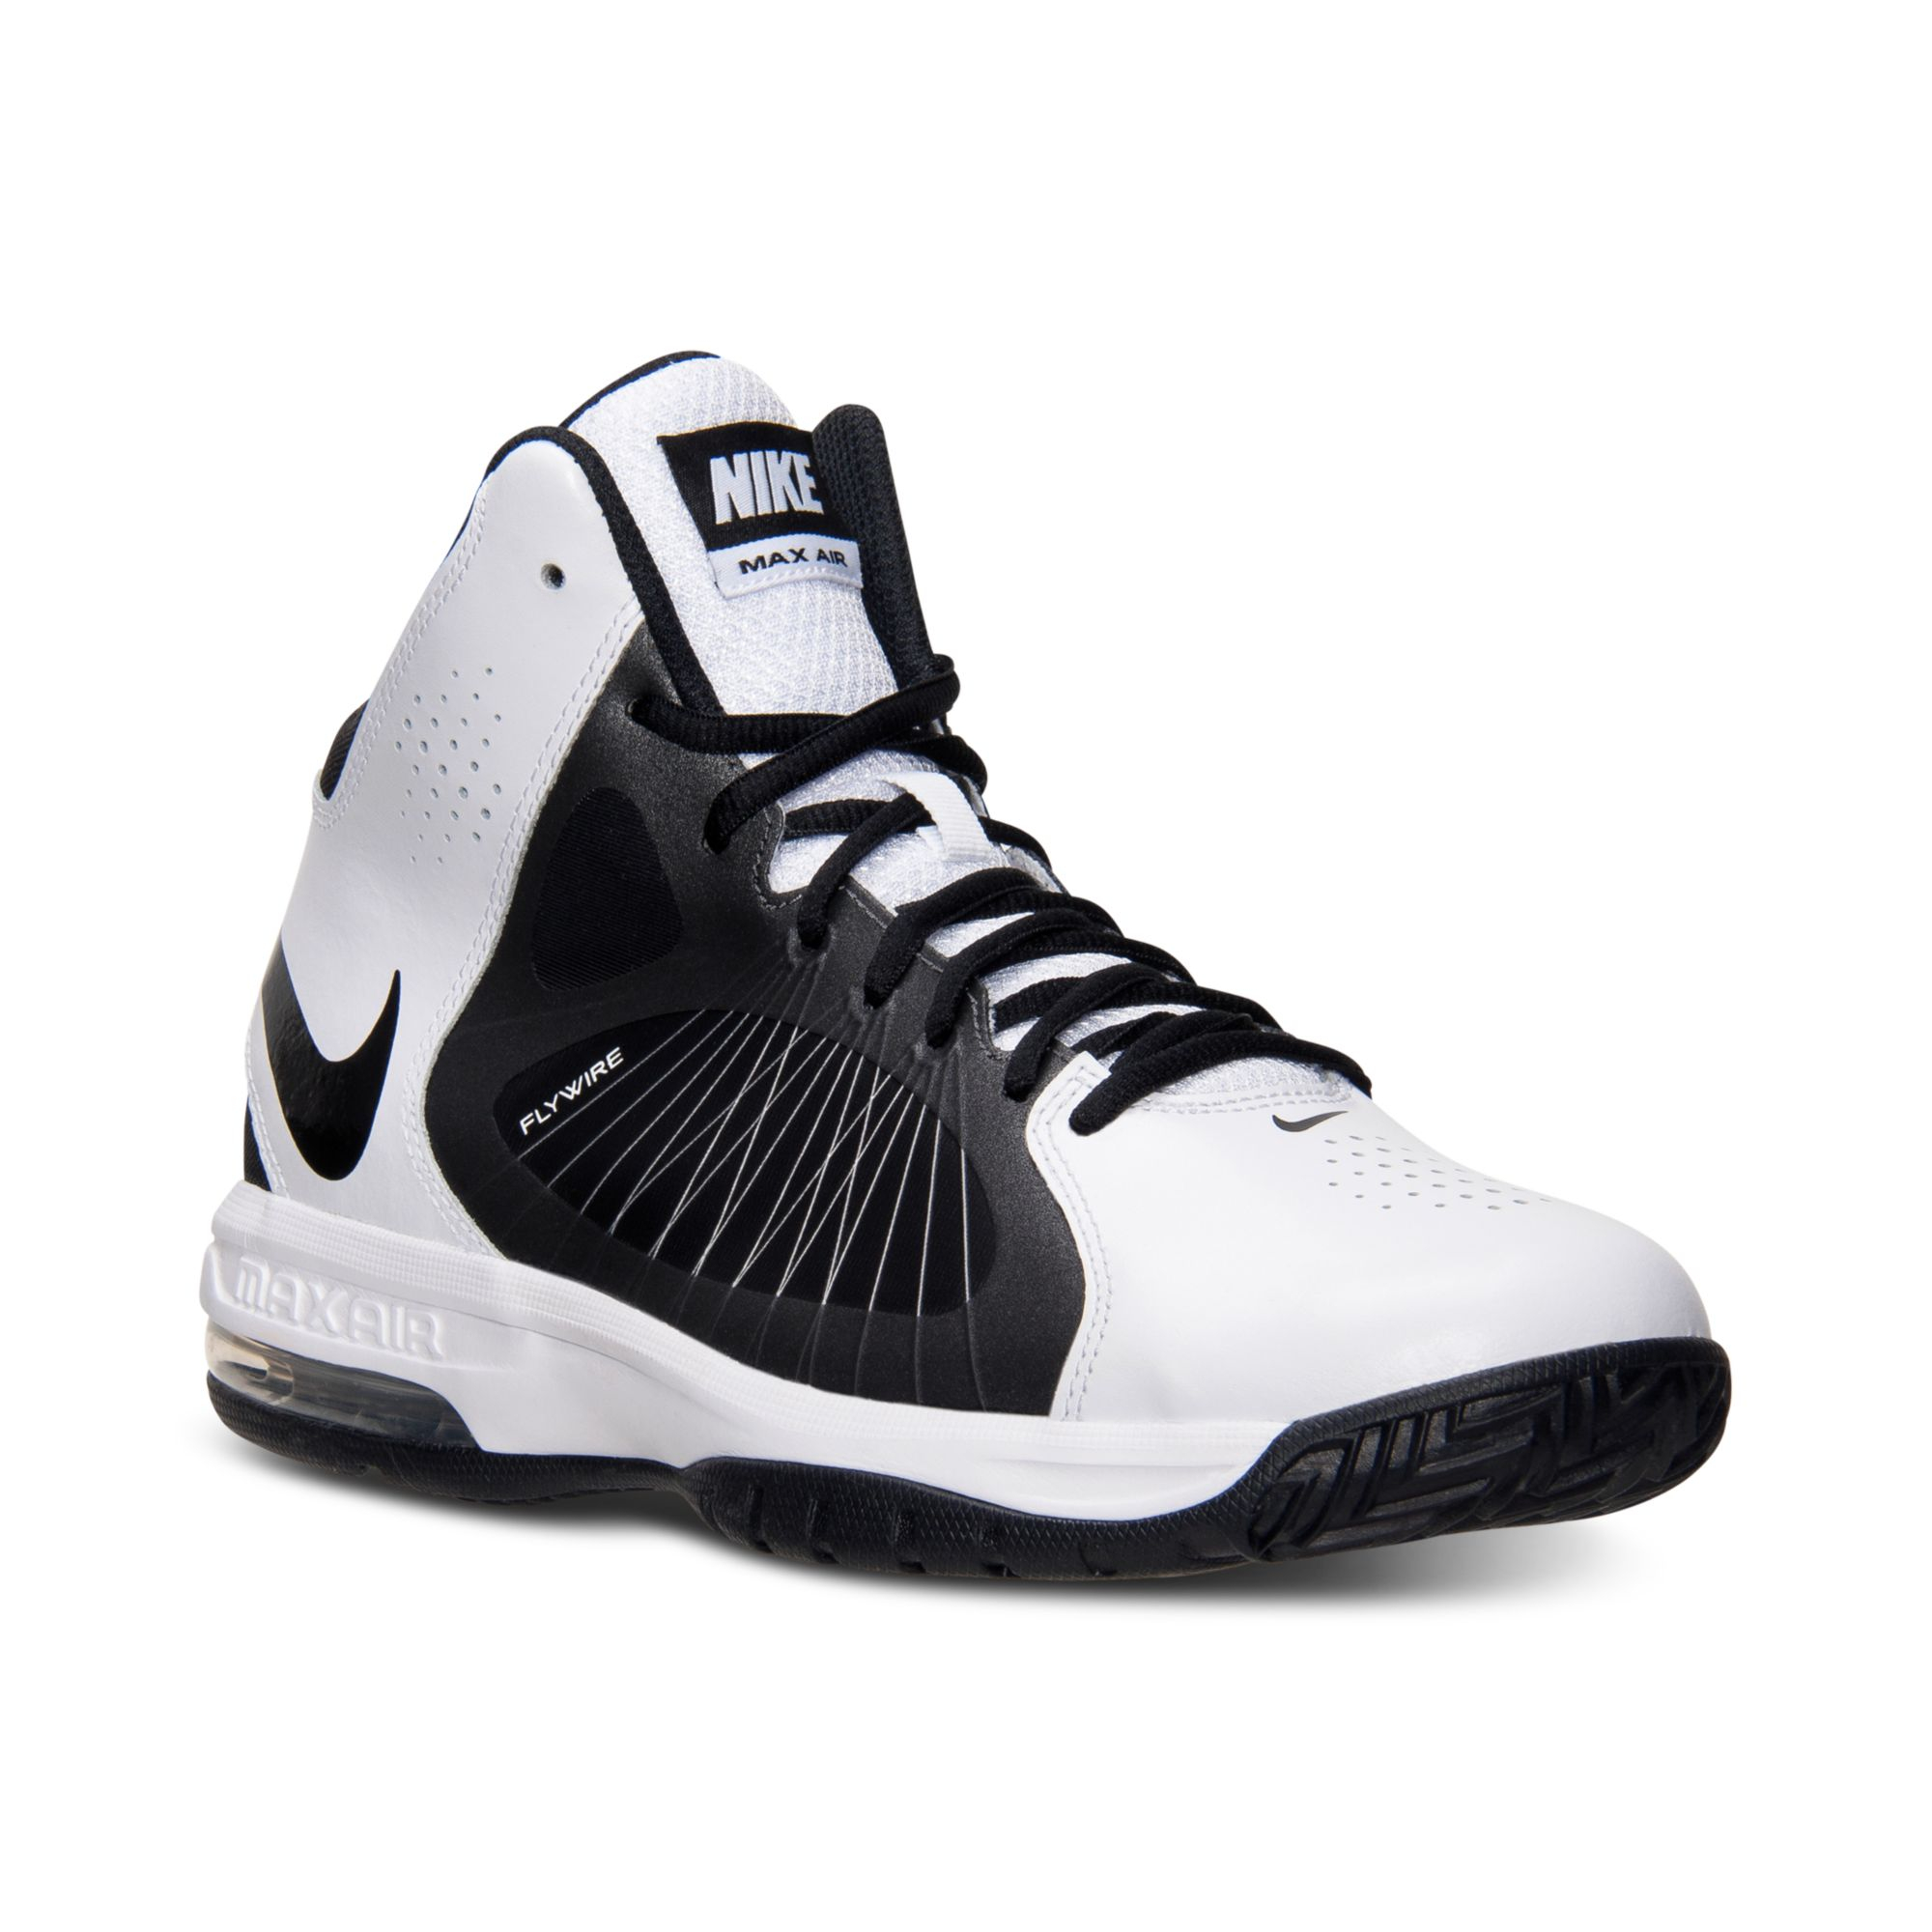 nike air max actualizer high performance basketball shoes